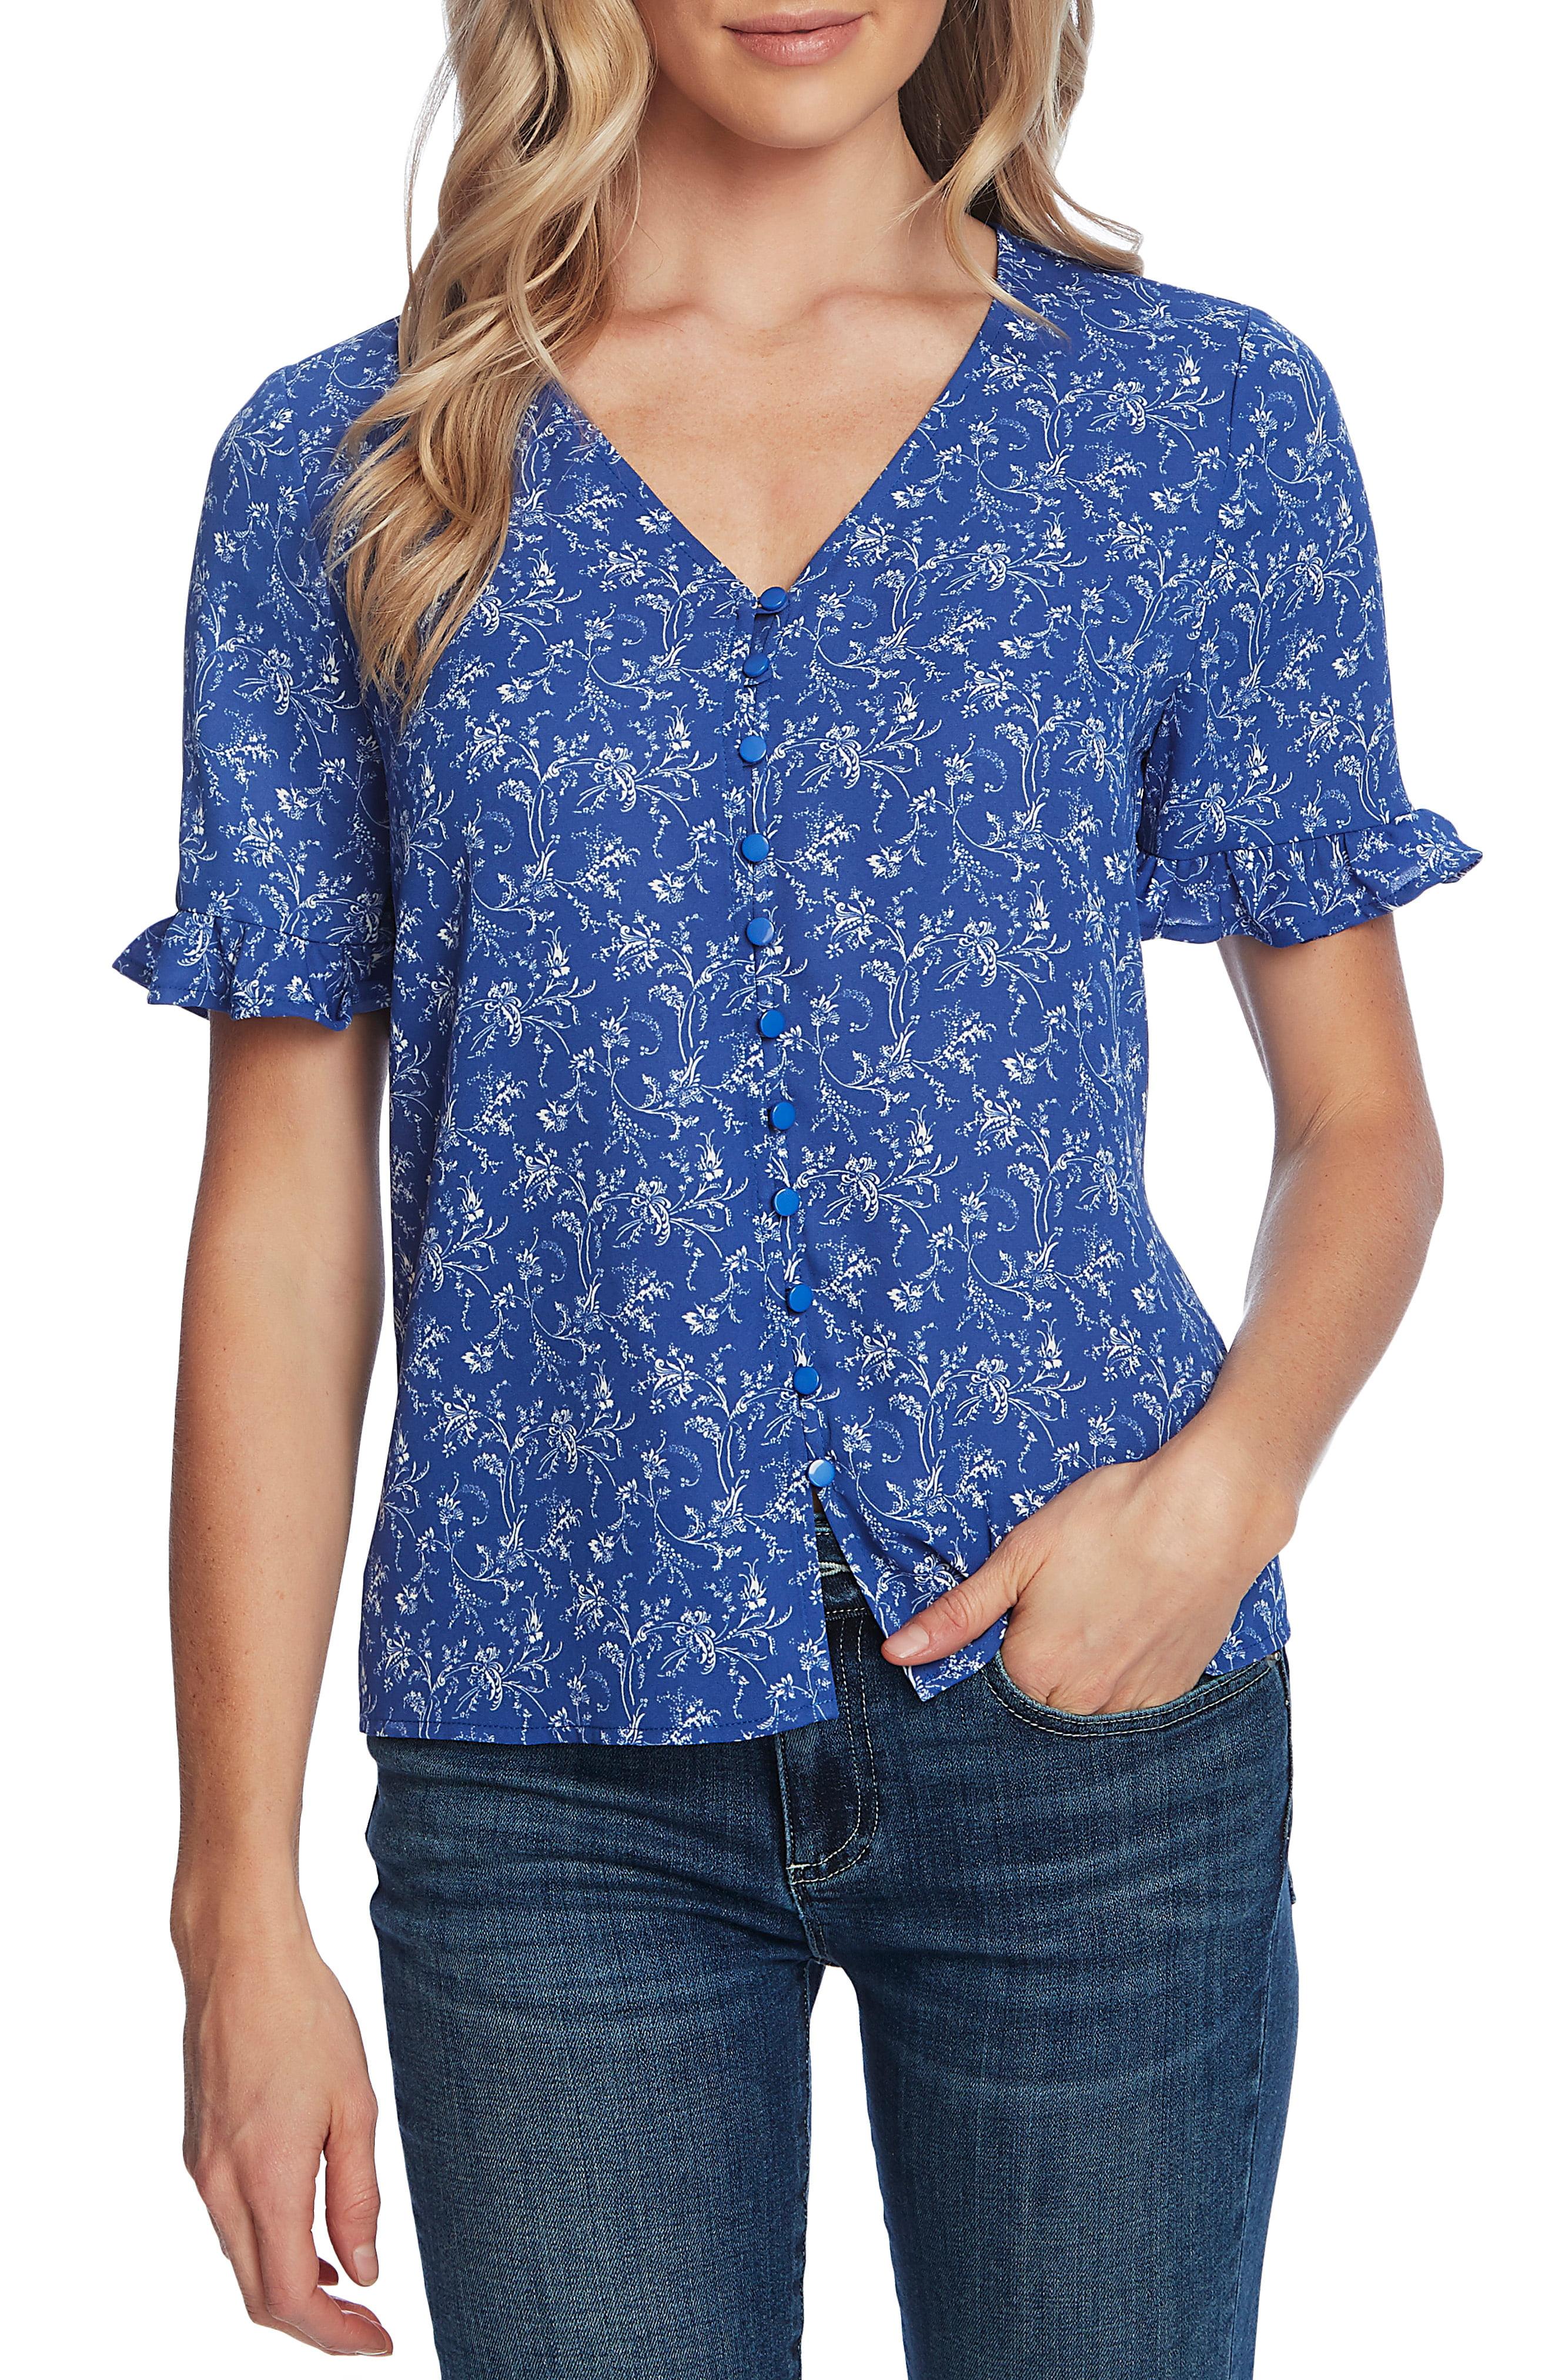 Cece Toile Vines Ruffle Sleeve Blouse in Blue - Lyst